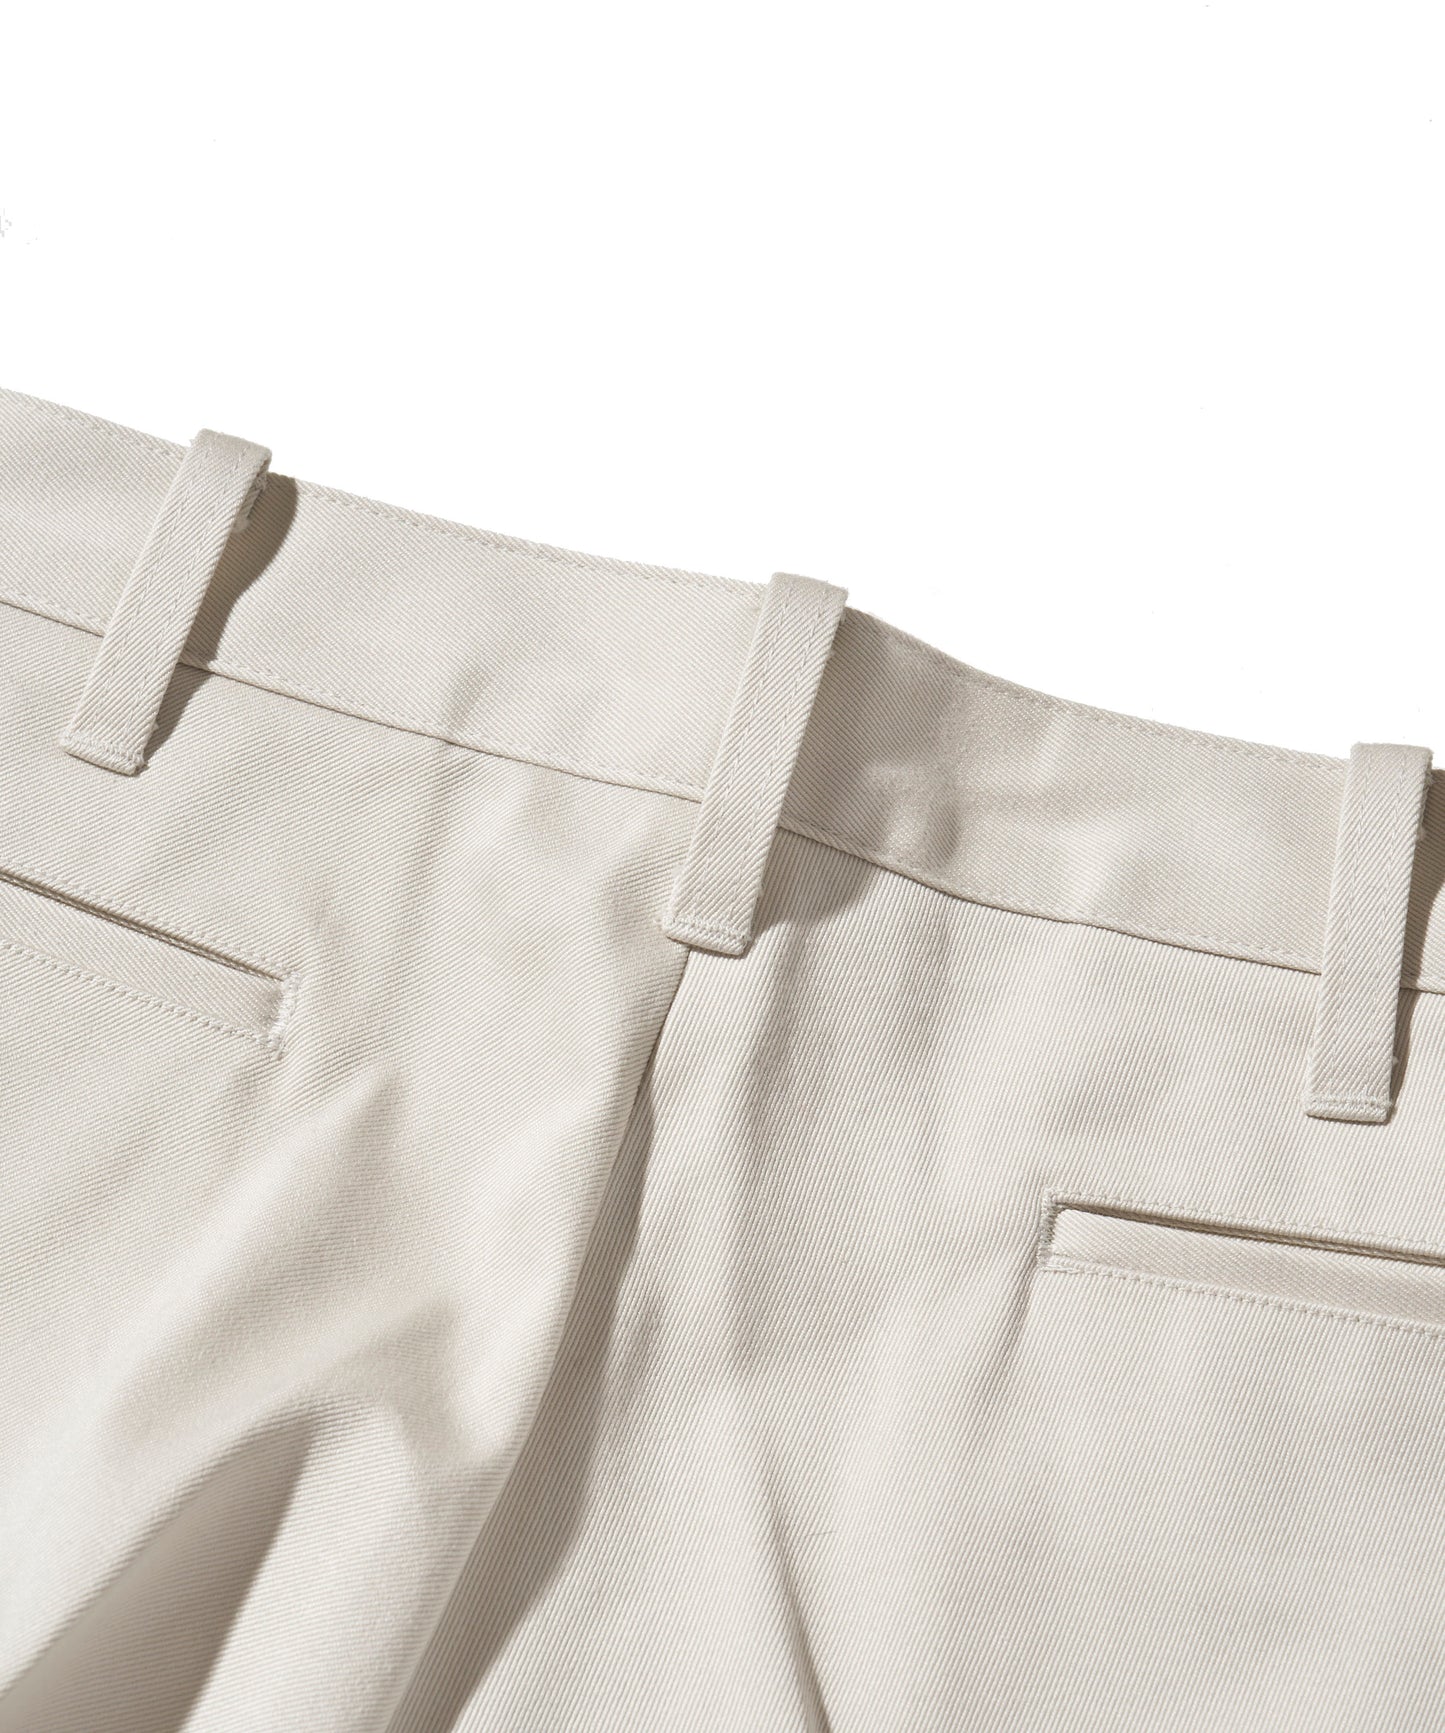 【 23FW 】ANATOMICA TRIM FIT PANT Ⅰ WEST POINT / STONE